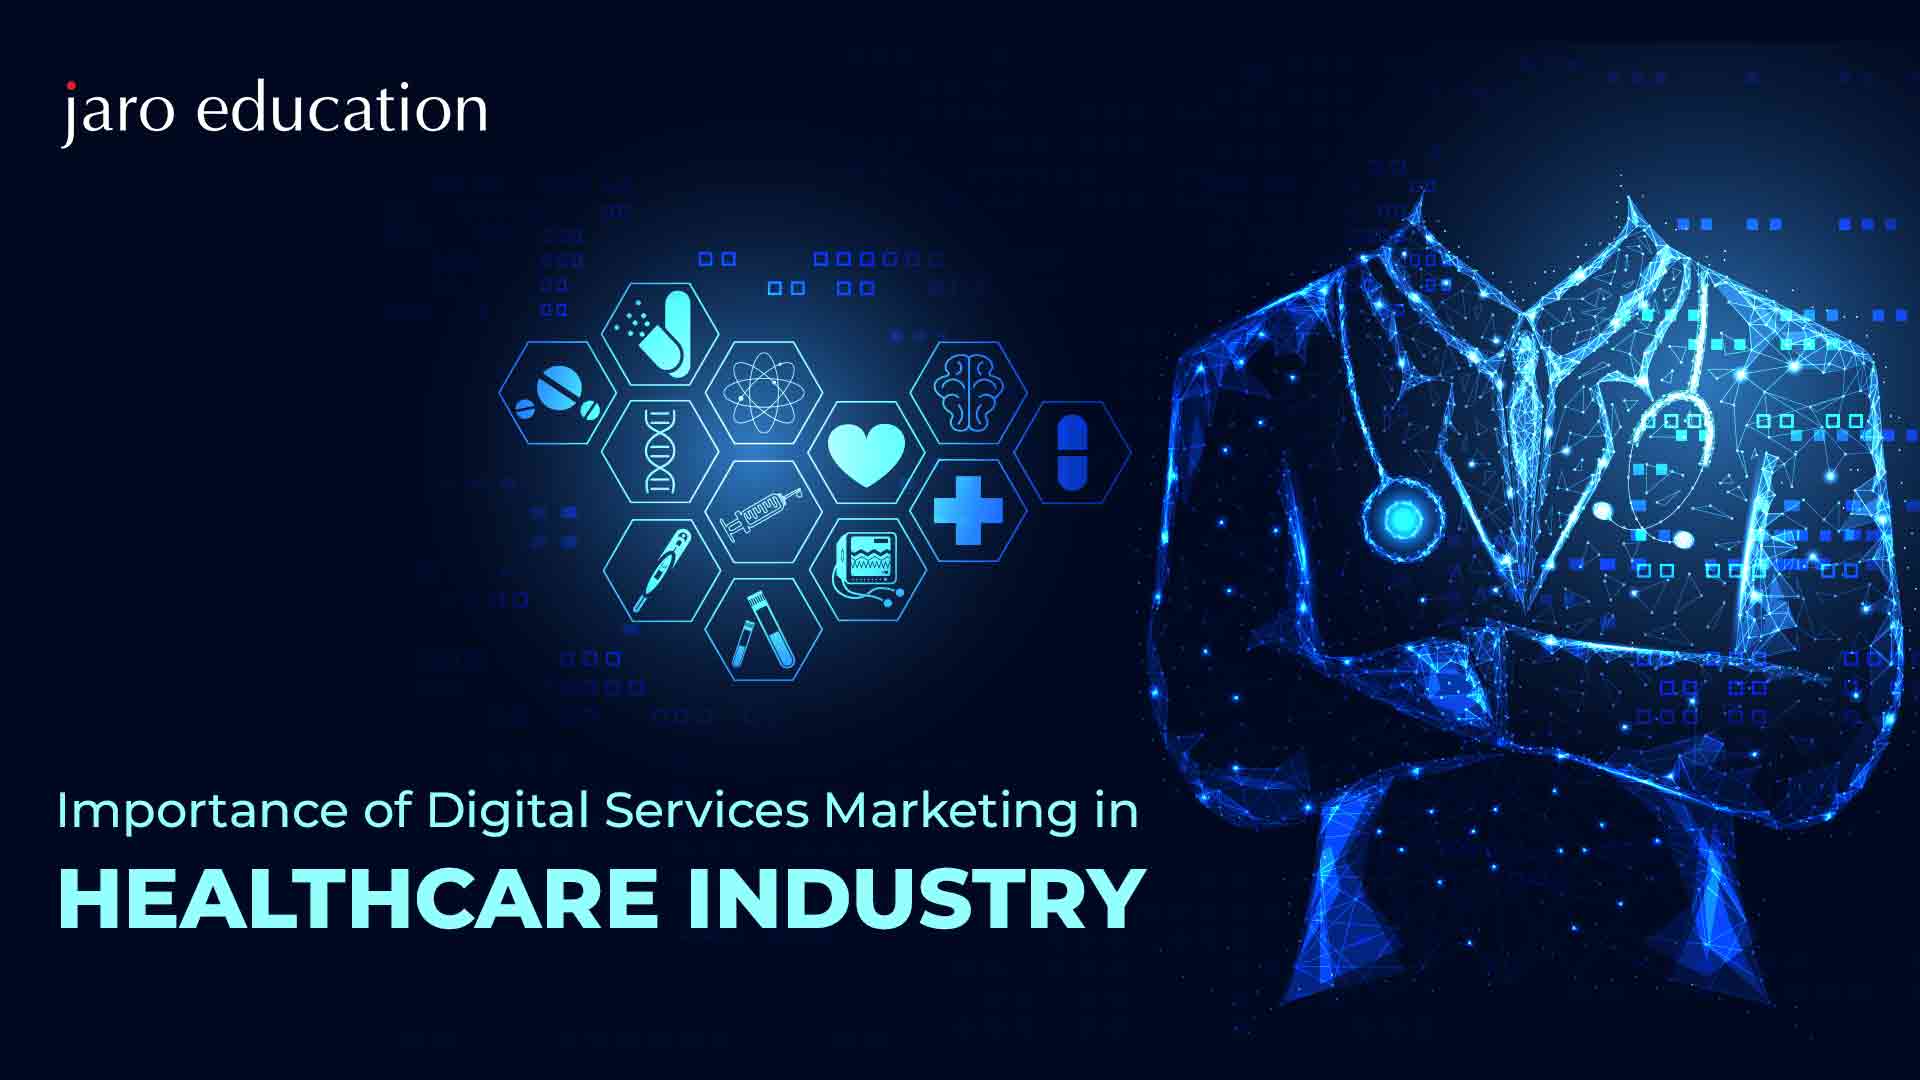 Importance of Digital Services Marketing in Healthcare Industry